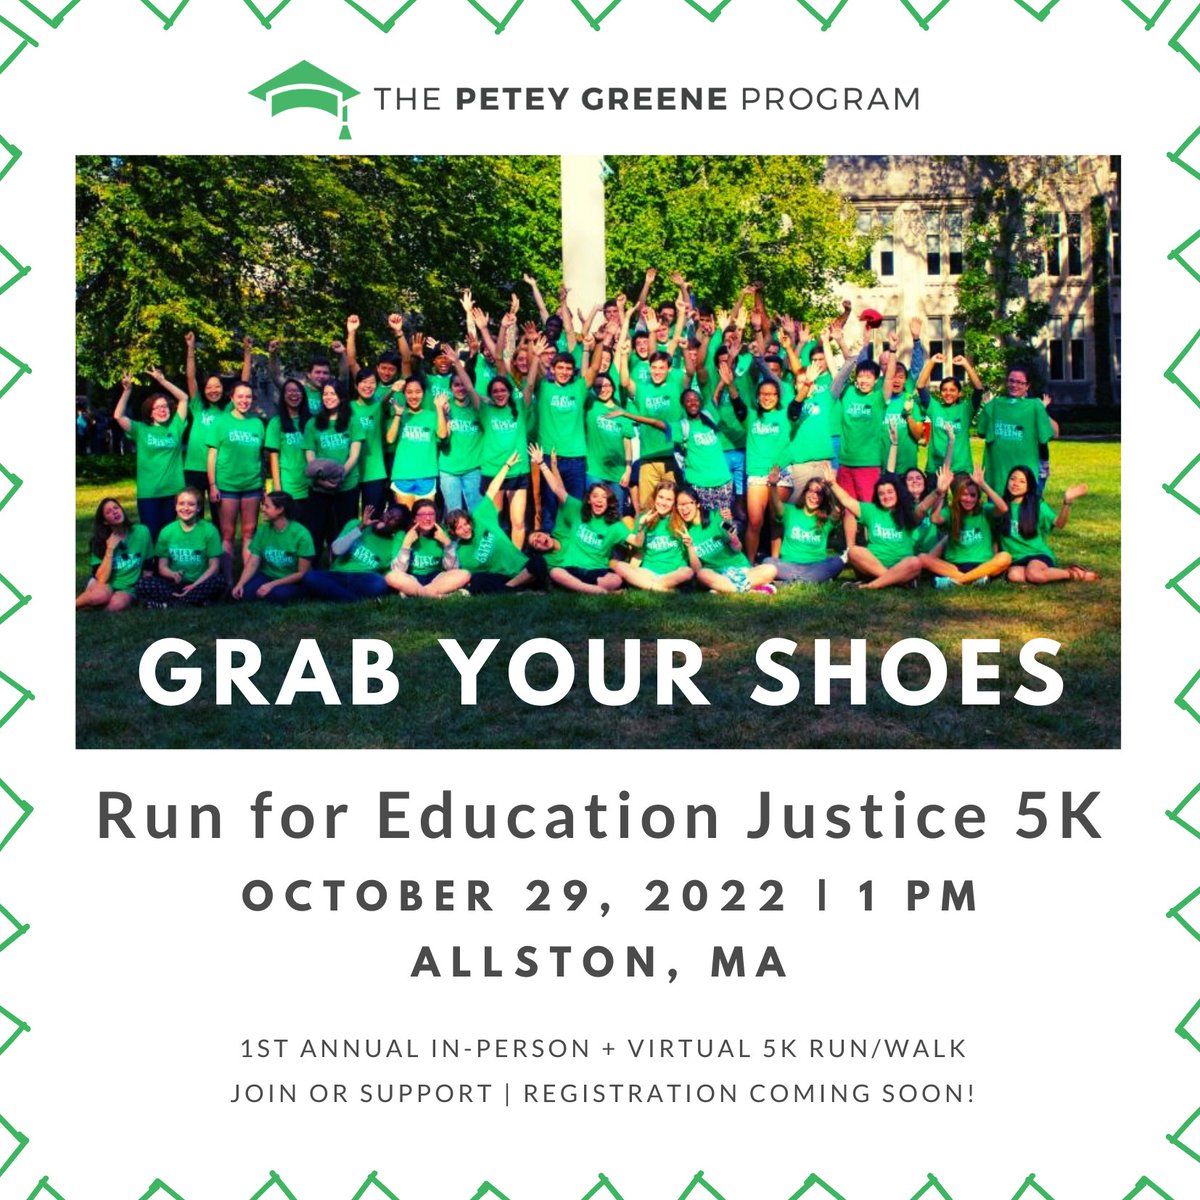 It’s time to take a step in the right direction!  

Join the Petey Greene Program for our first annual Run for Education Justice 5K Walk/Run to support the educational goals of incarcerated learners.  

More details coming soon!  

#5KM #HigherEd #Volunteering #justicework